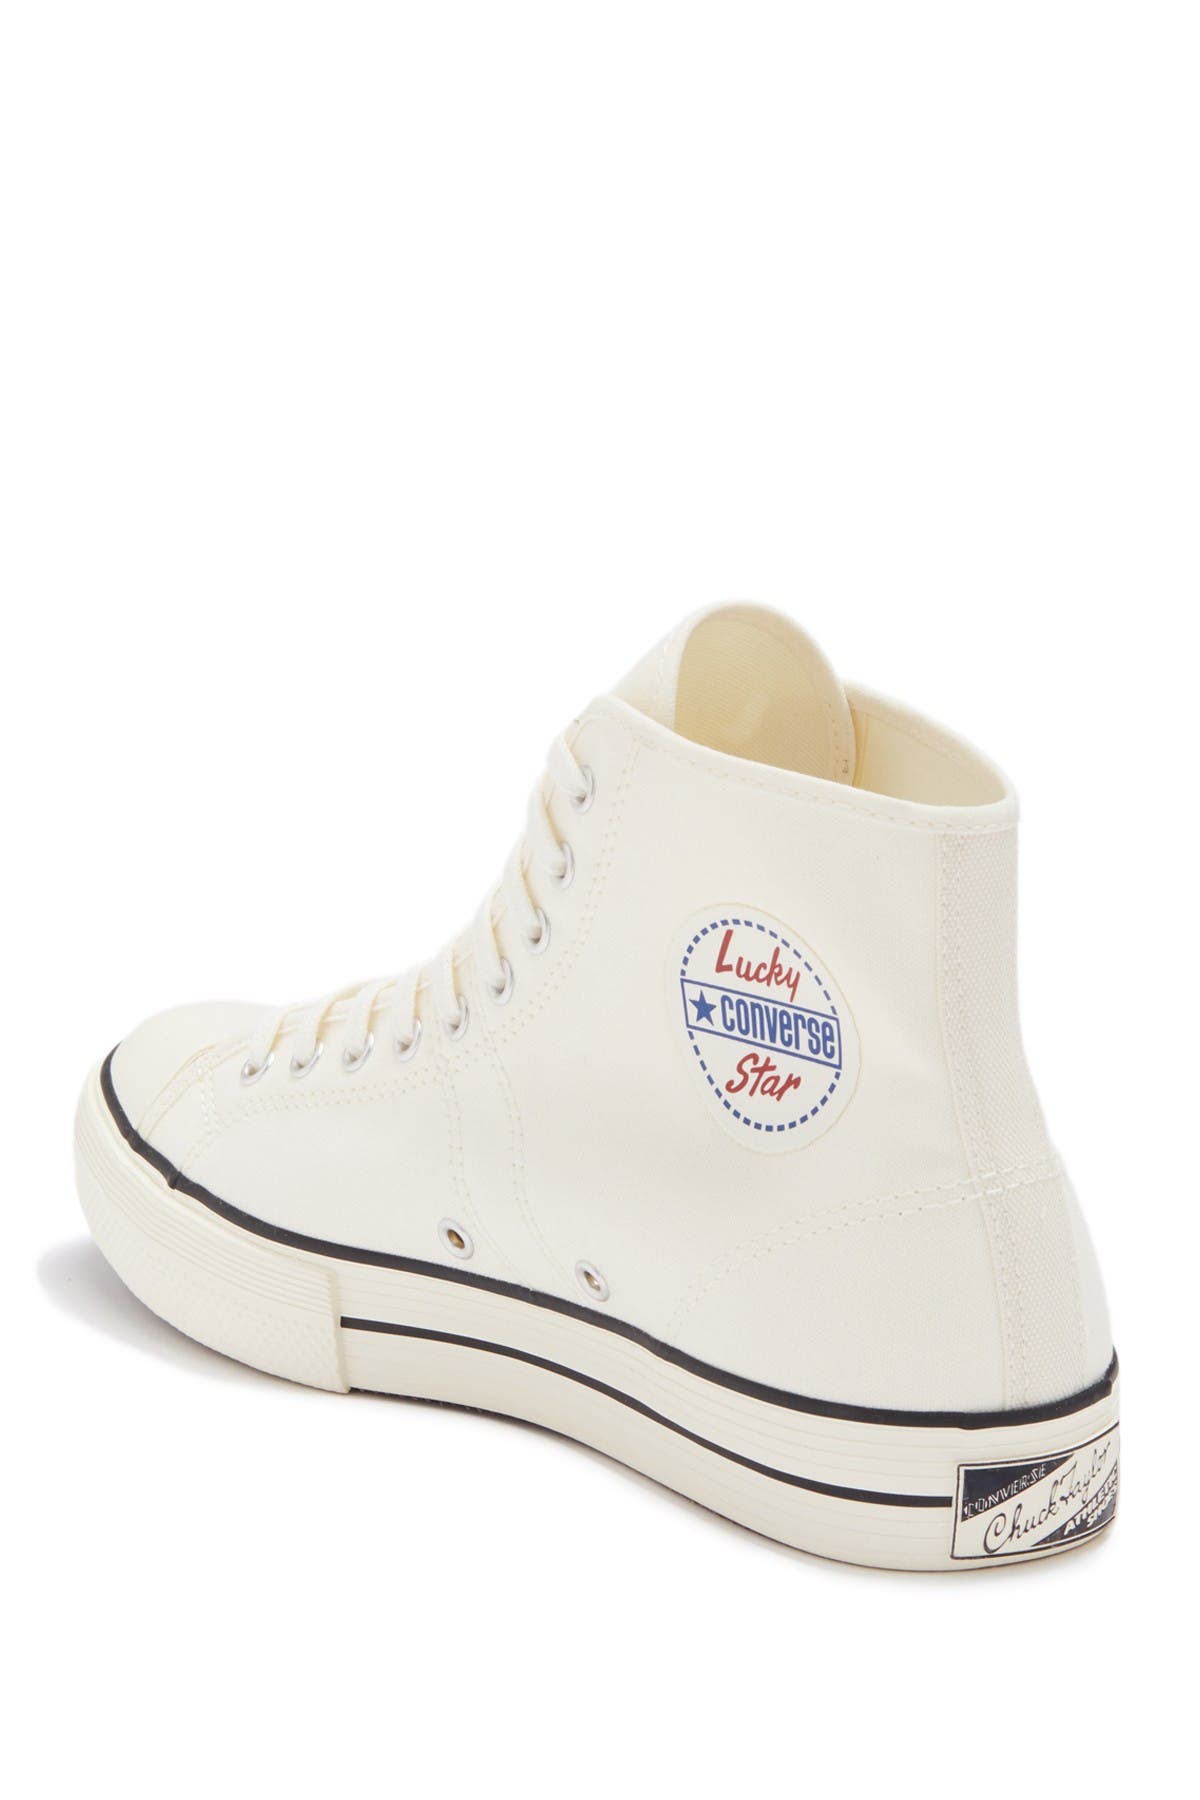 converse lucky star sizing